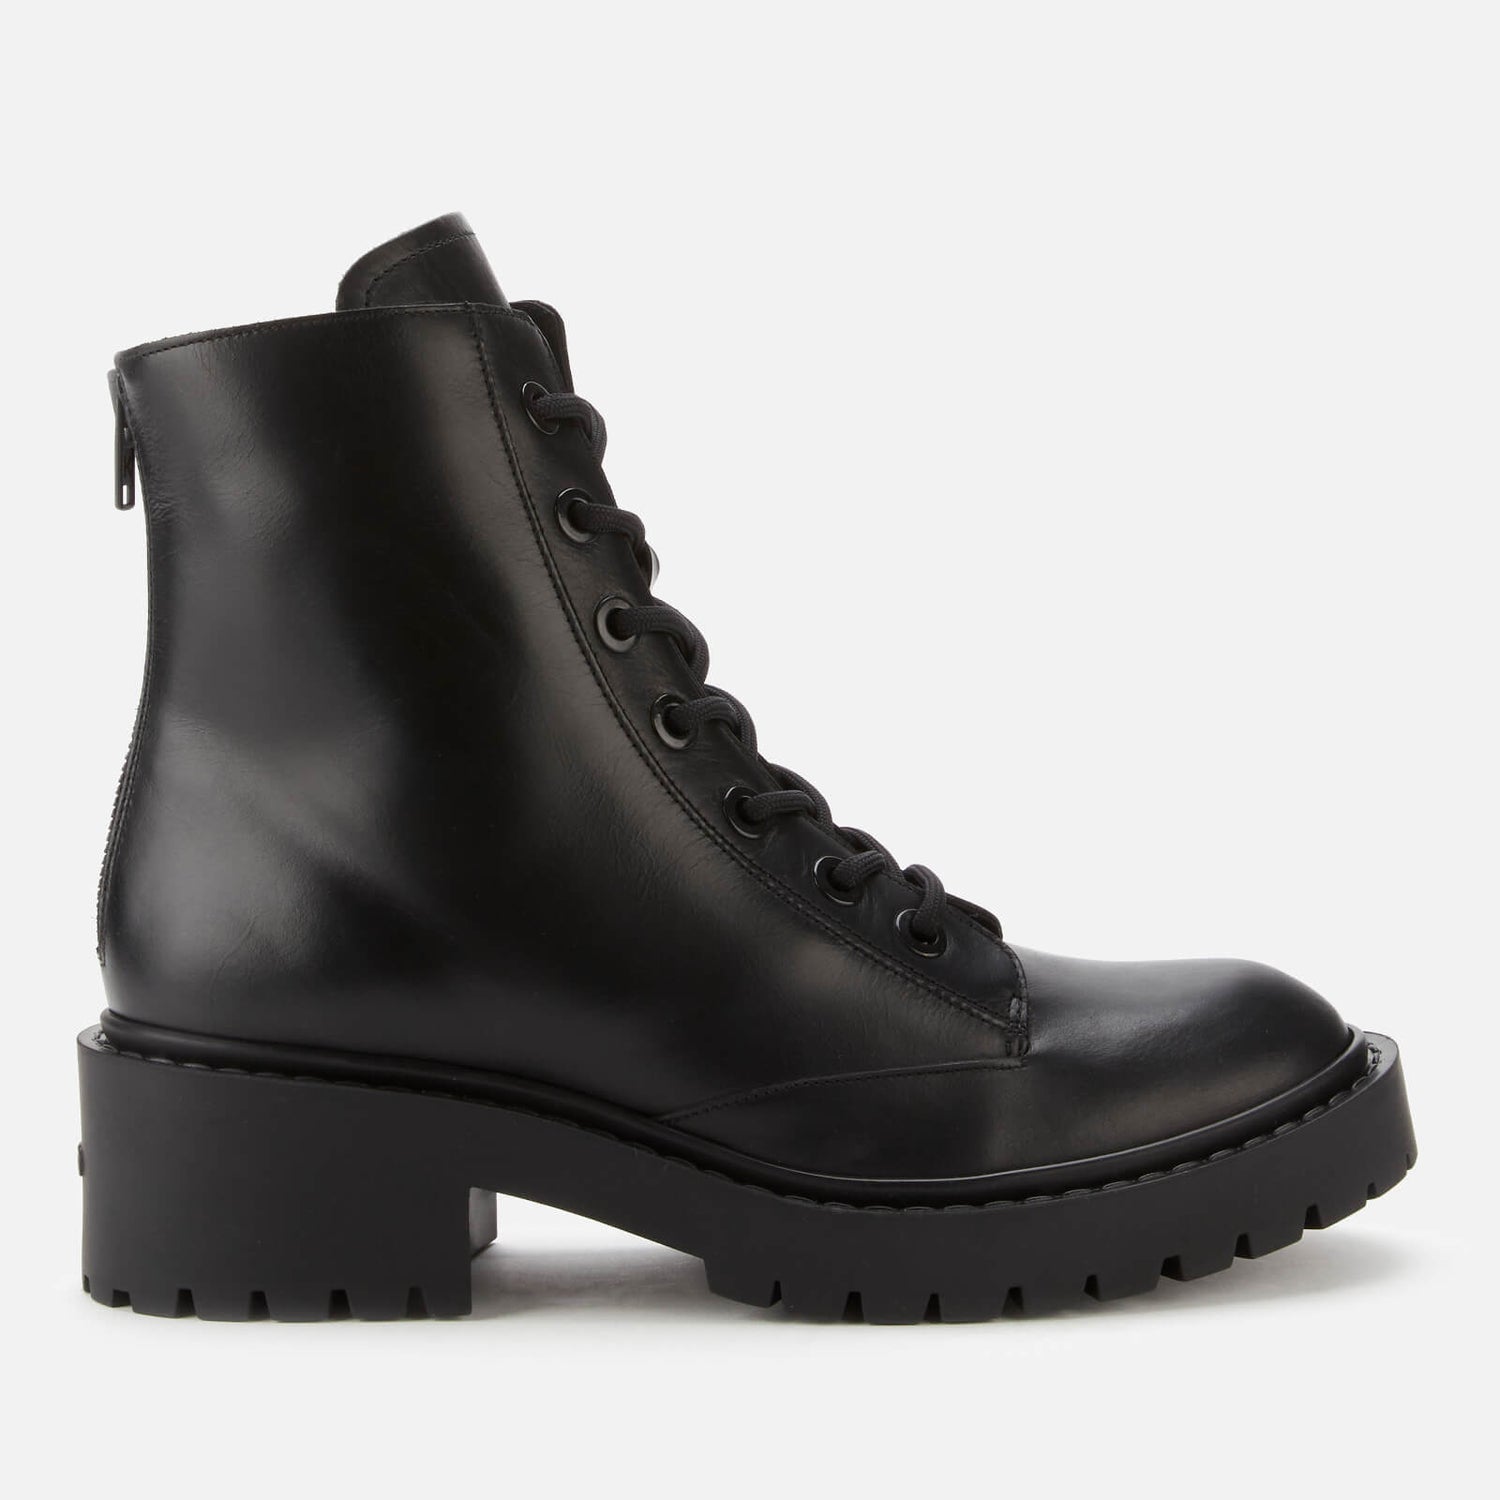 KENZO Women's Pike Leather Lace Up Boots - Black - Free UK Delivery ...